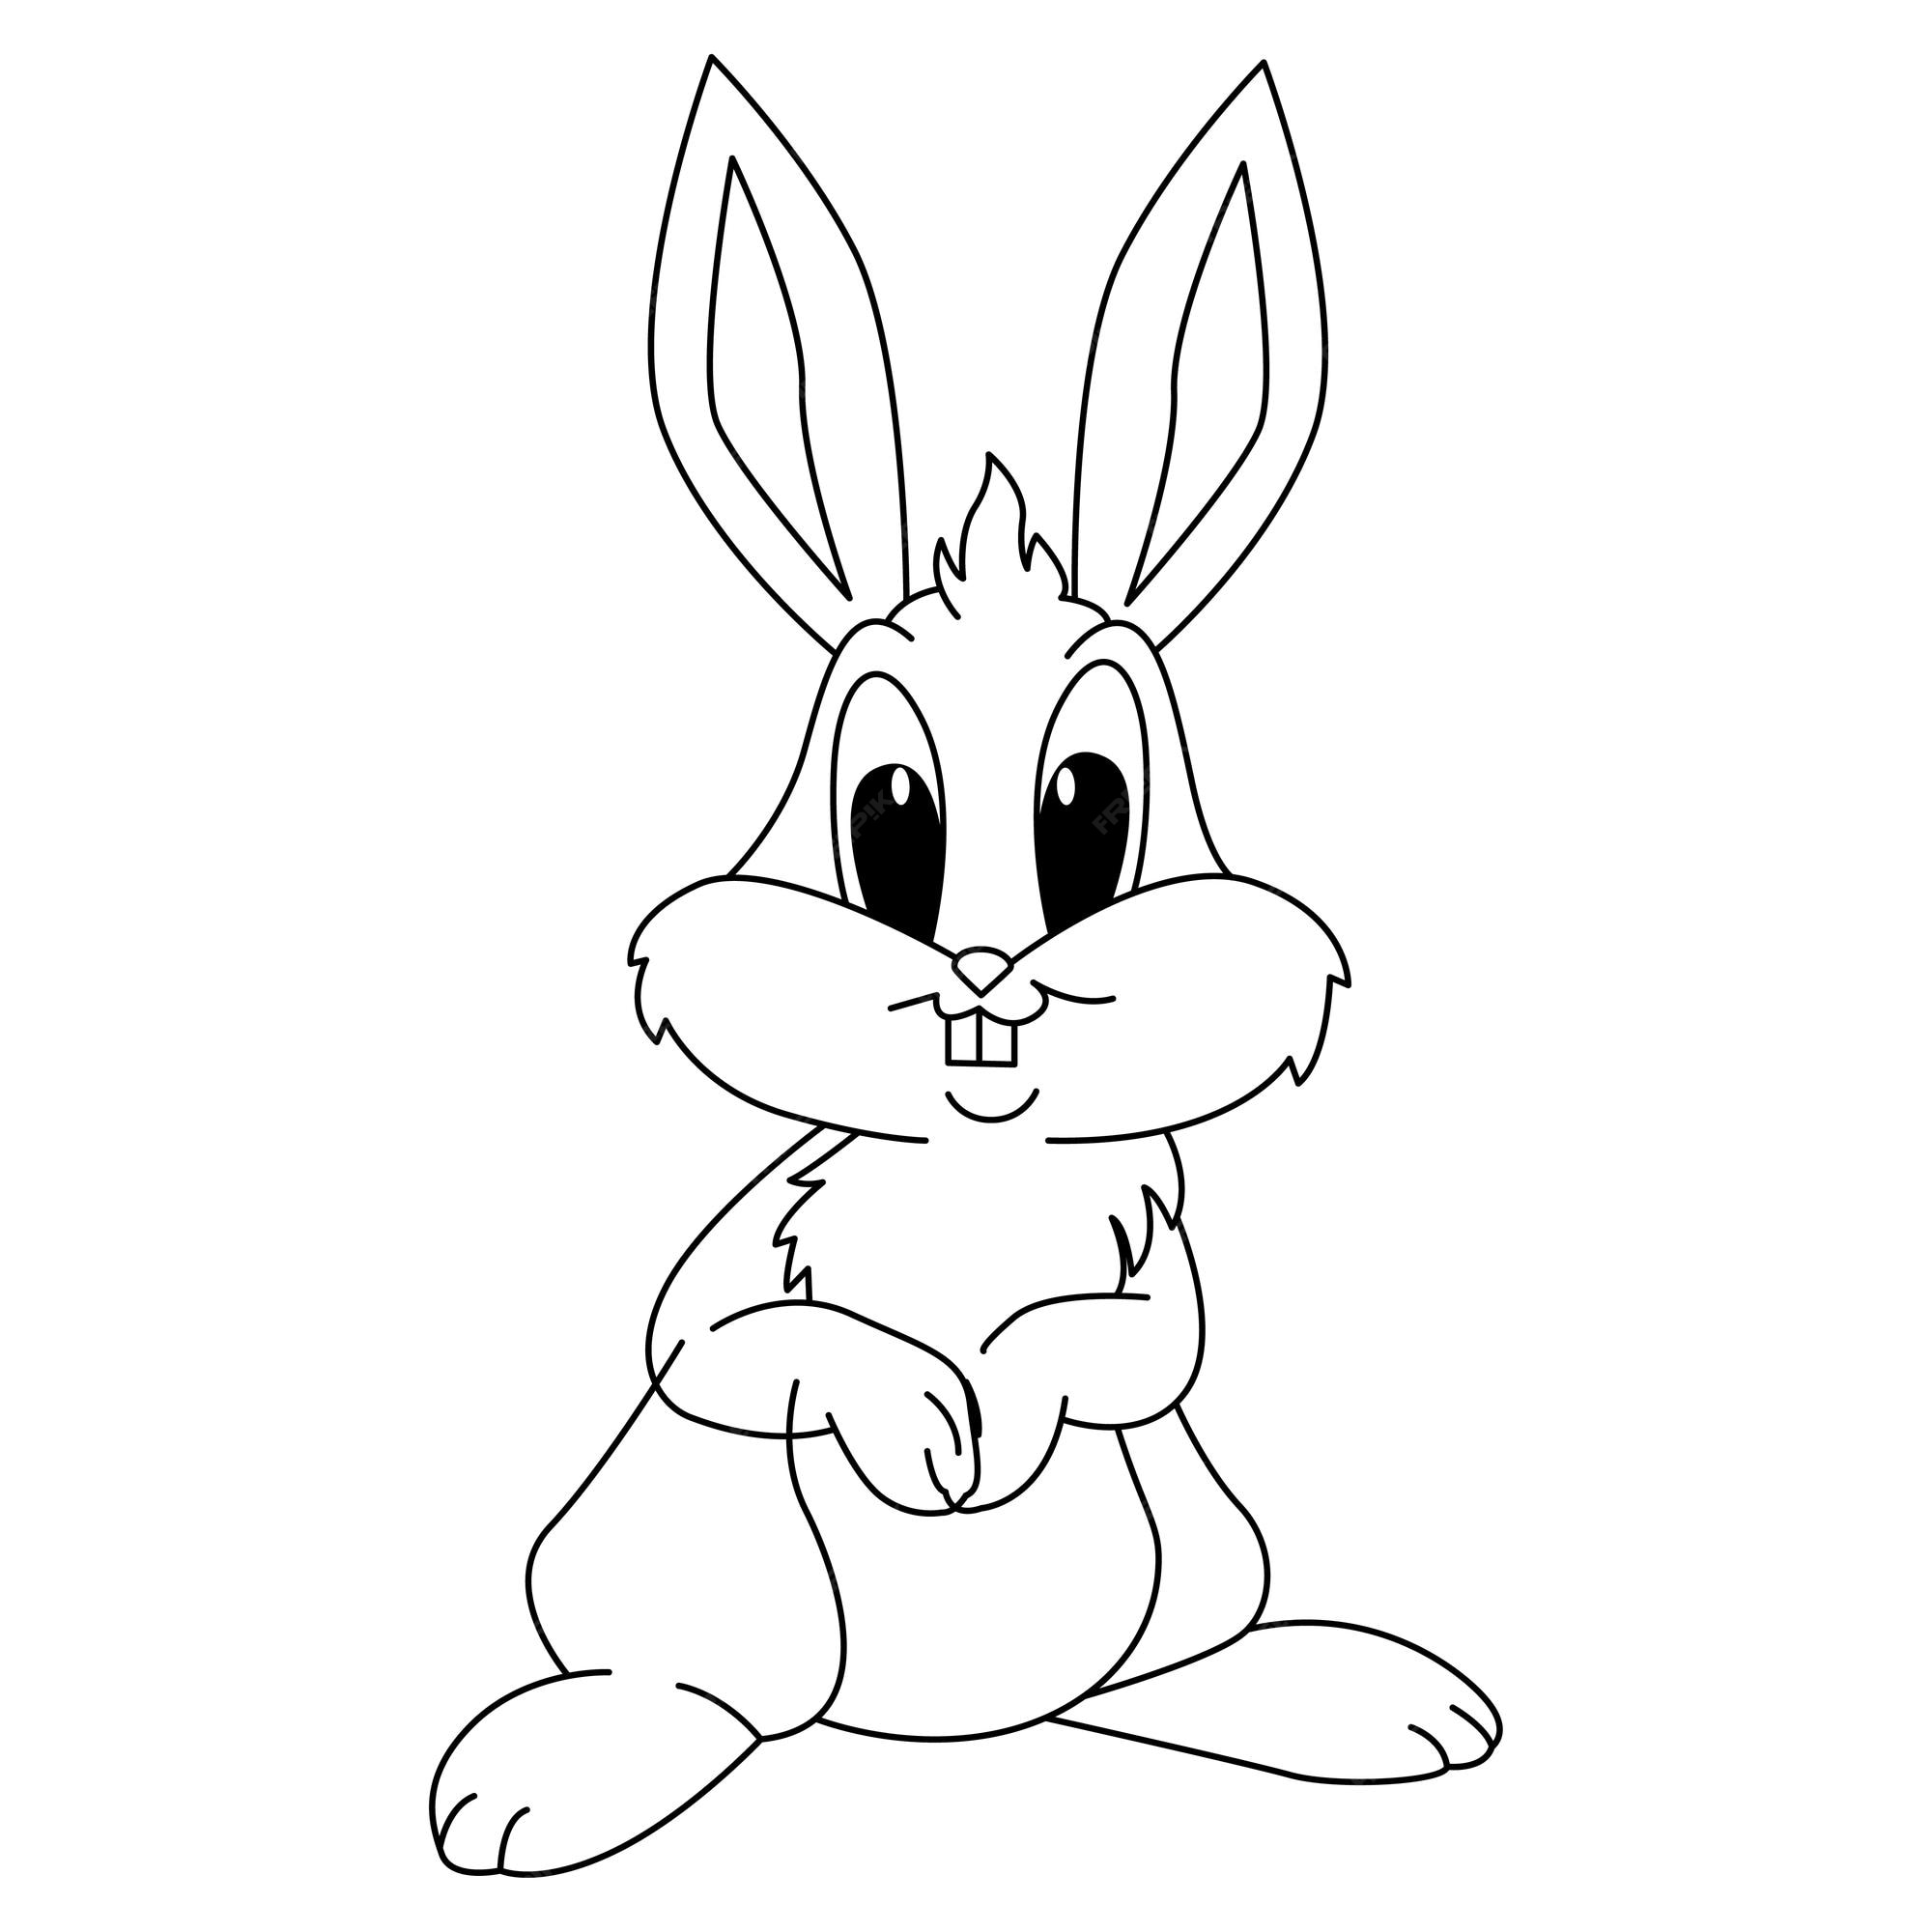 Premium vector cute rabbit cartoon coloring page illustration vector for kids coloring book